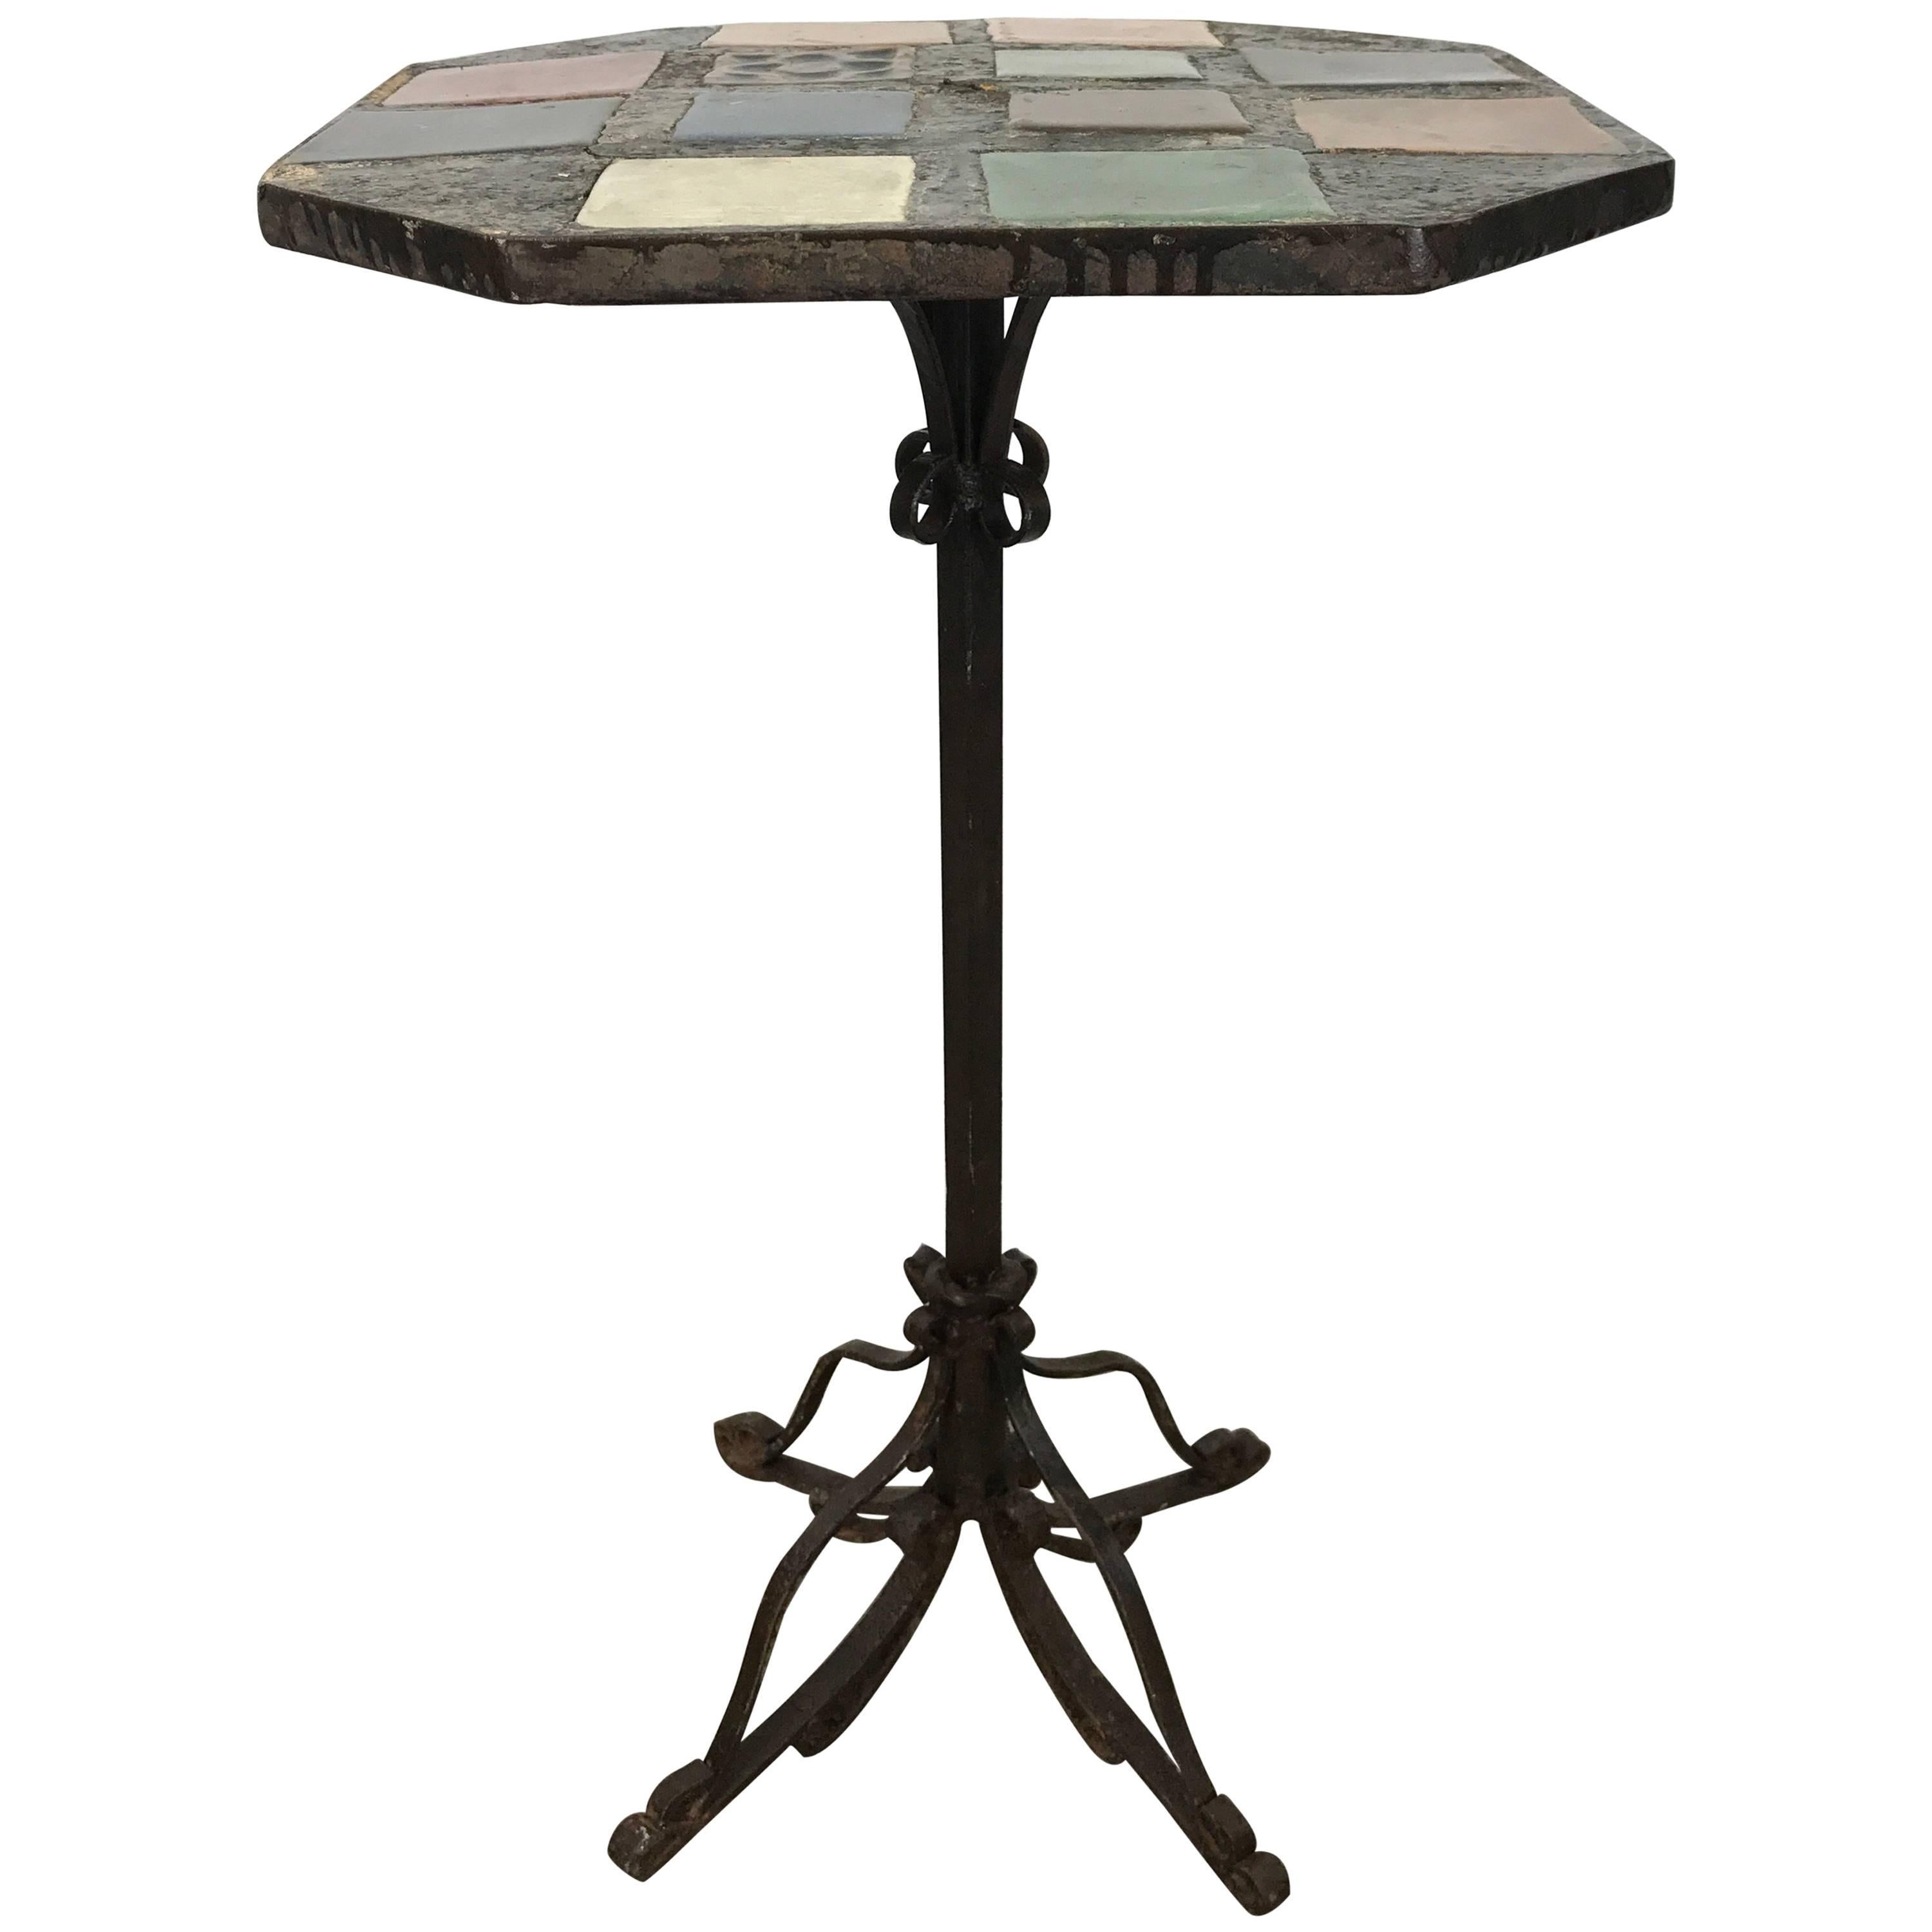 Stunning Arts and Crafts Iron and Tile-Top Stand or Table, Italy